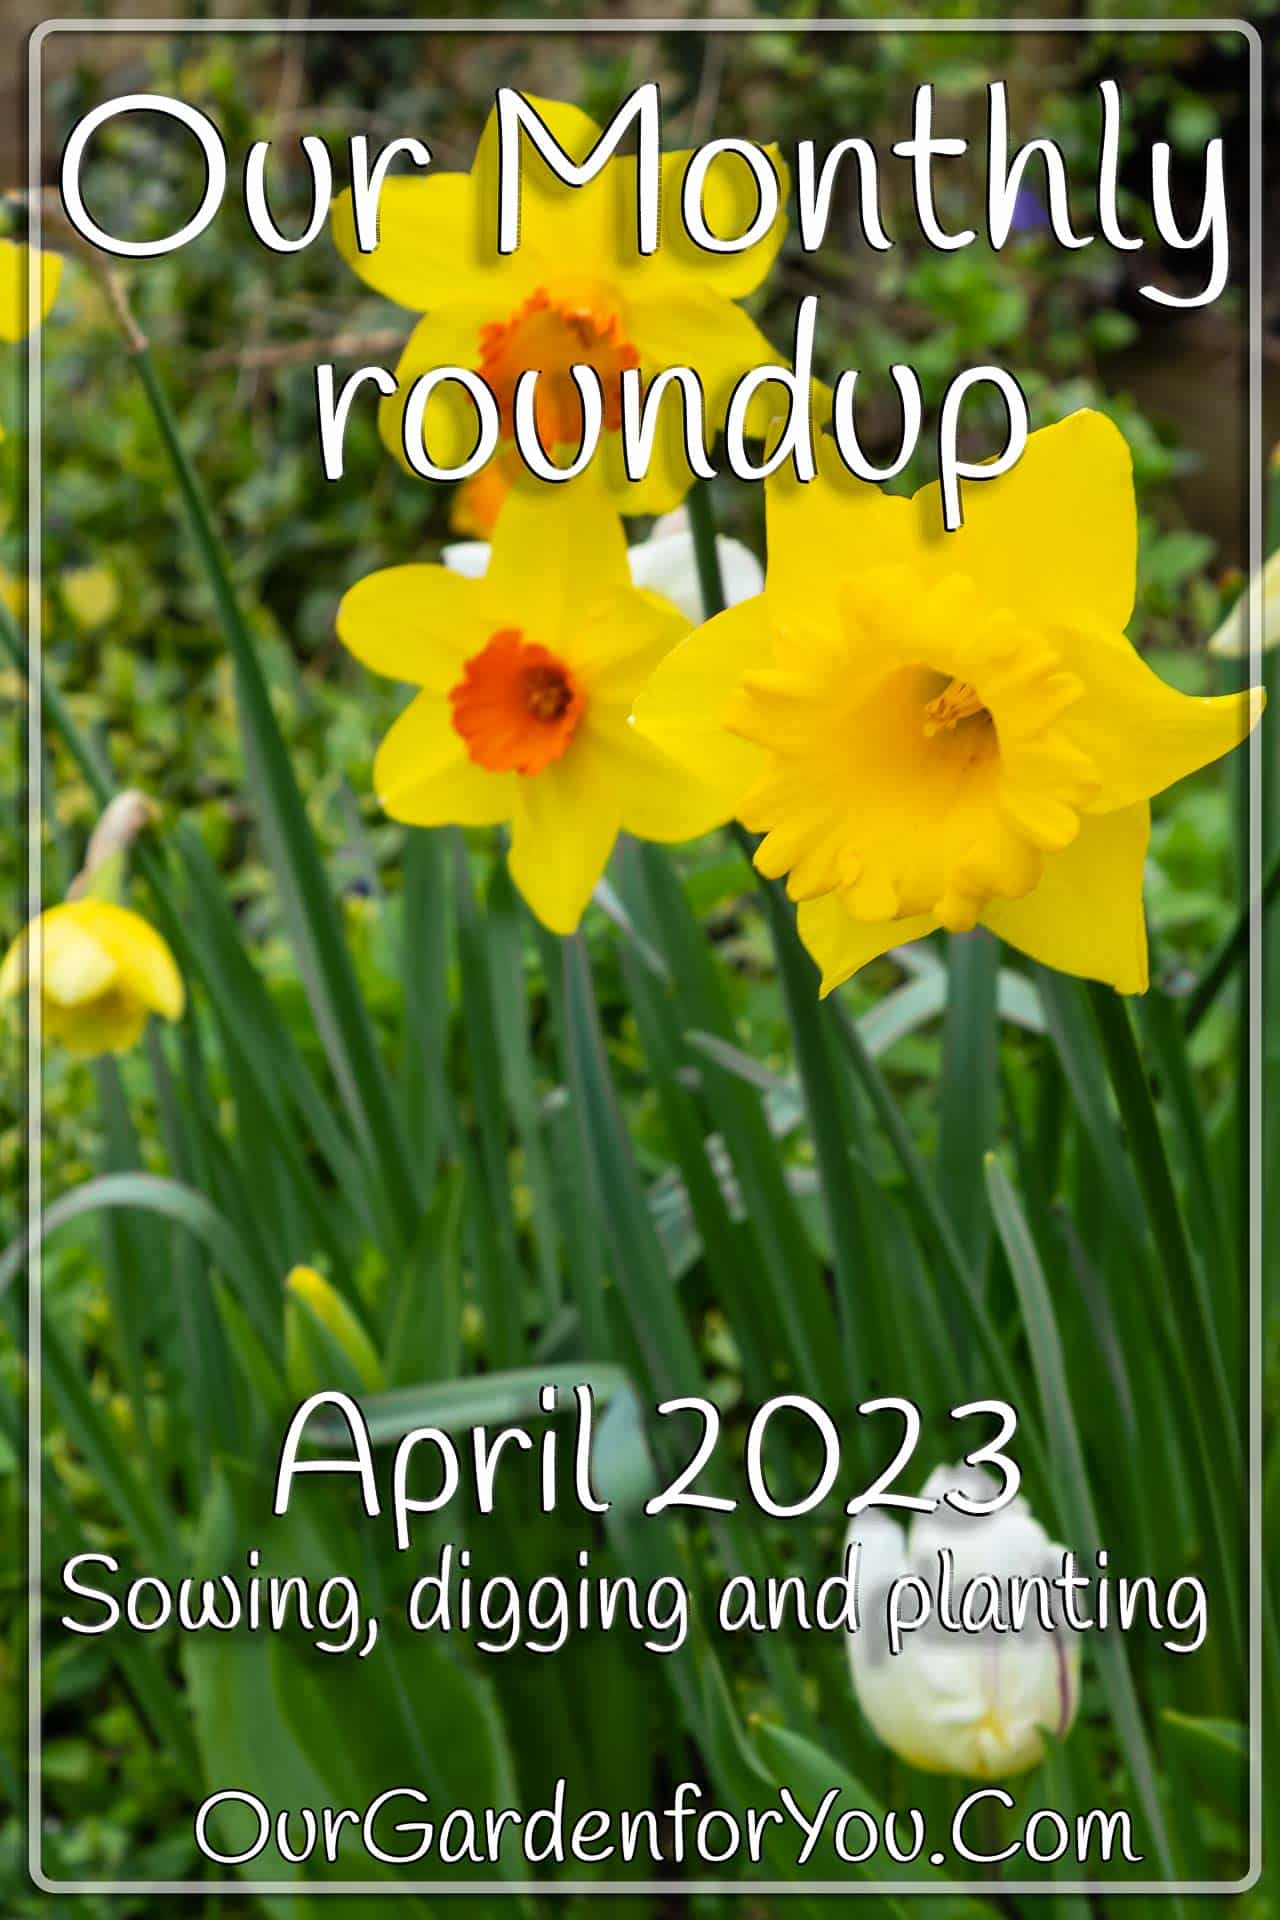 The Pin image for our post - 'April 2023, Our Garden for You monthly roundup'